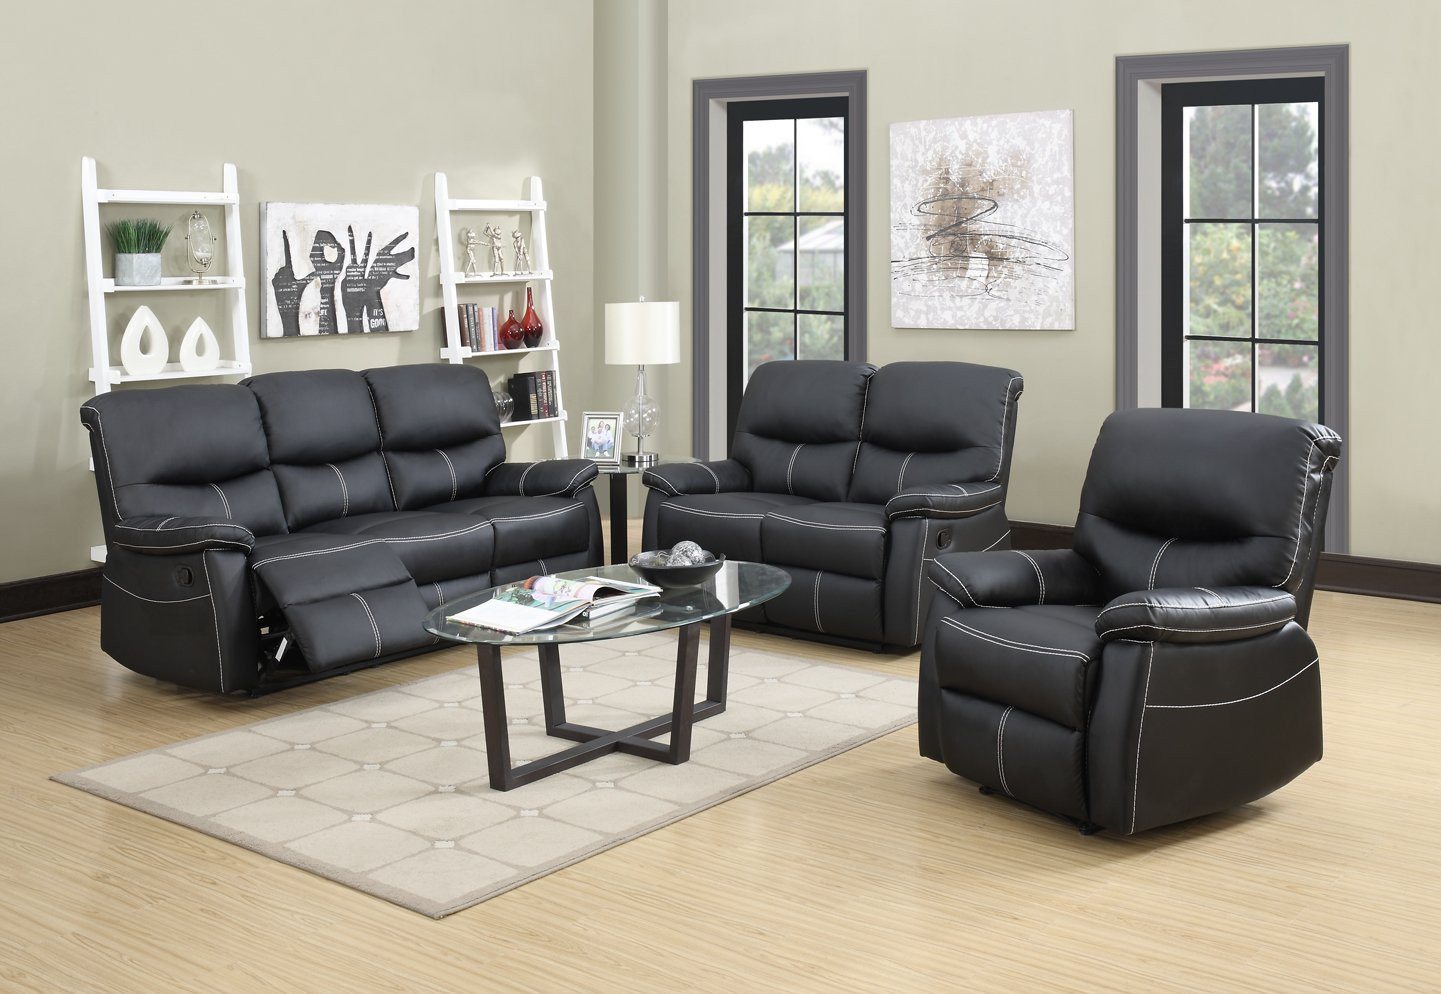 Amazon Living Room Chairs
 Best Rated in Living Room Furniture Sets & Helpful